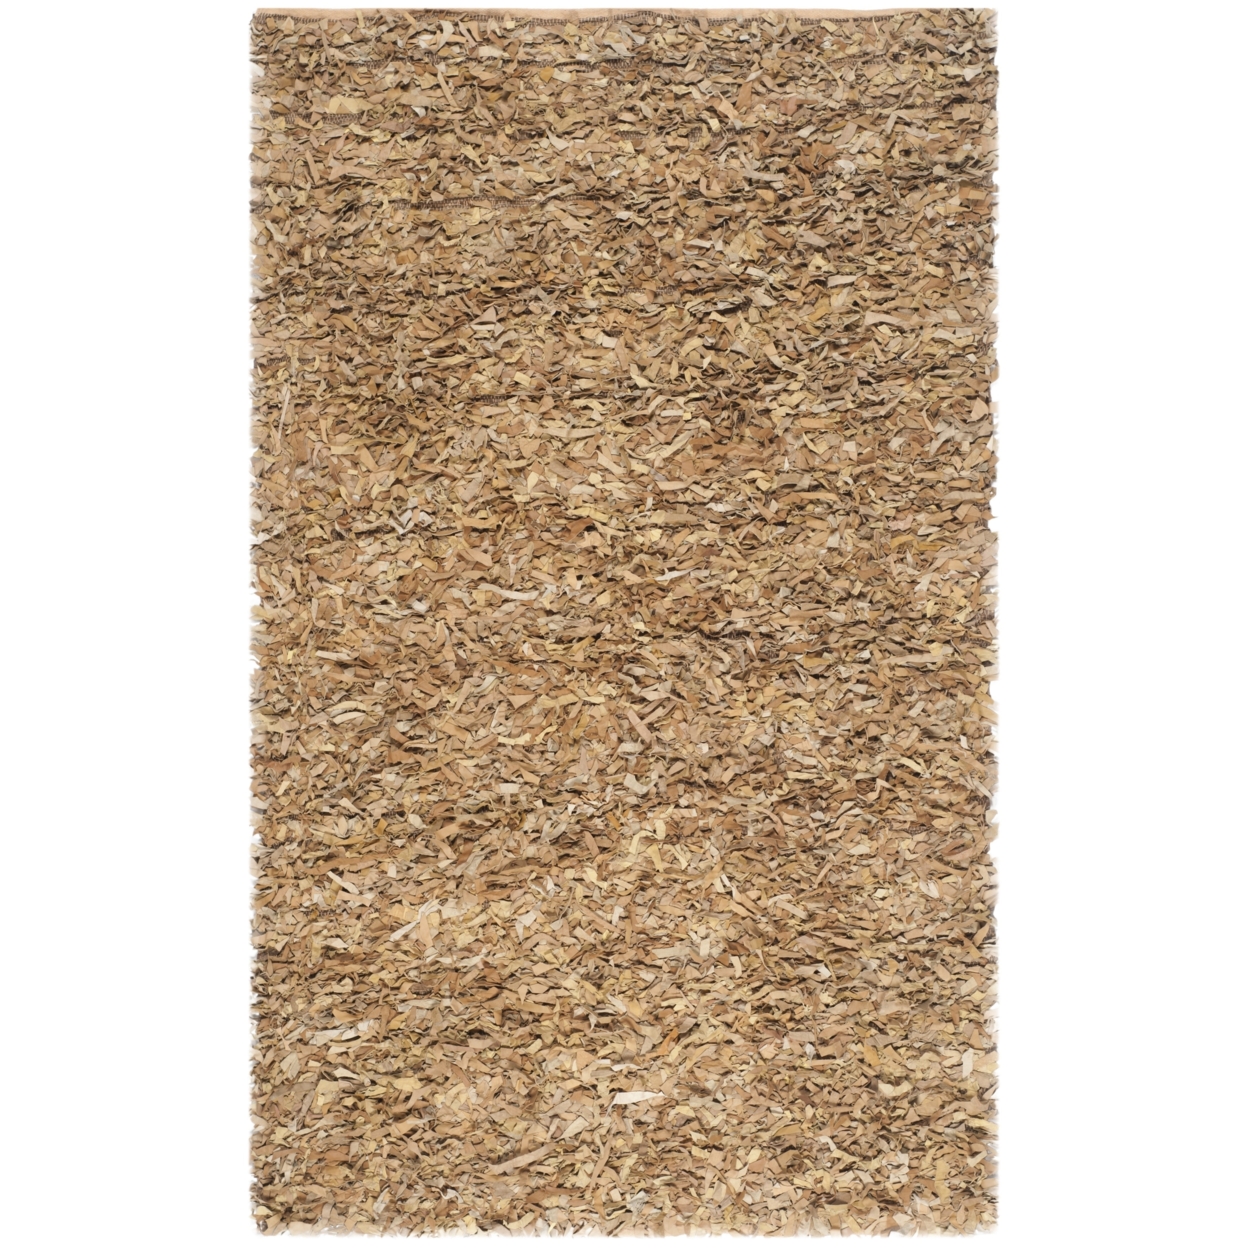 SAFAVIEH Leather Shag LSG511G Hand-knotted Light Gold Rug - 4' X 6'